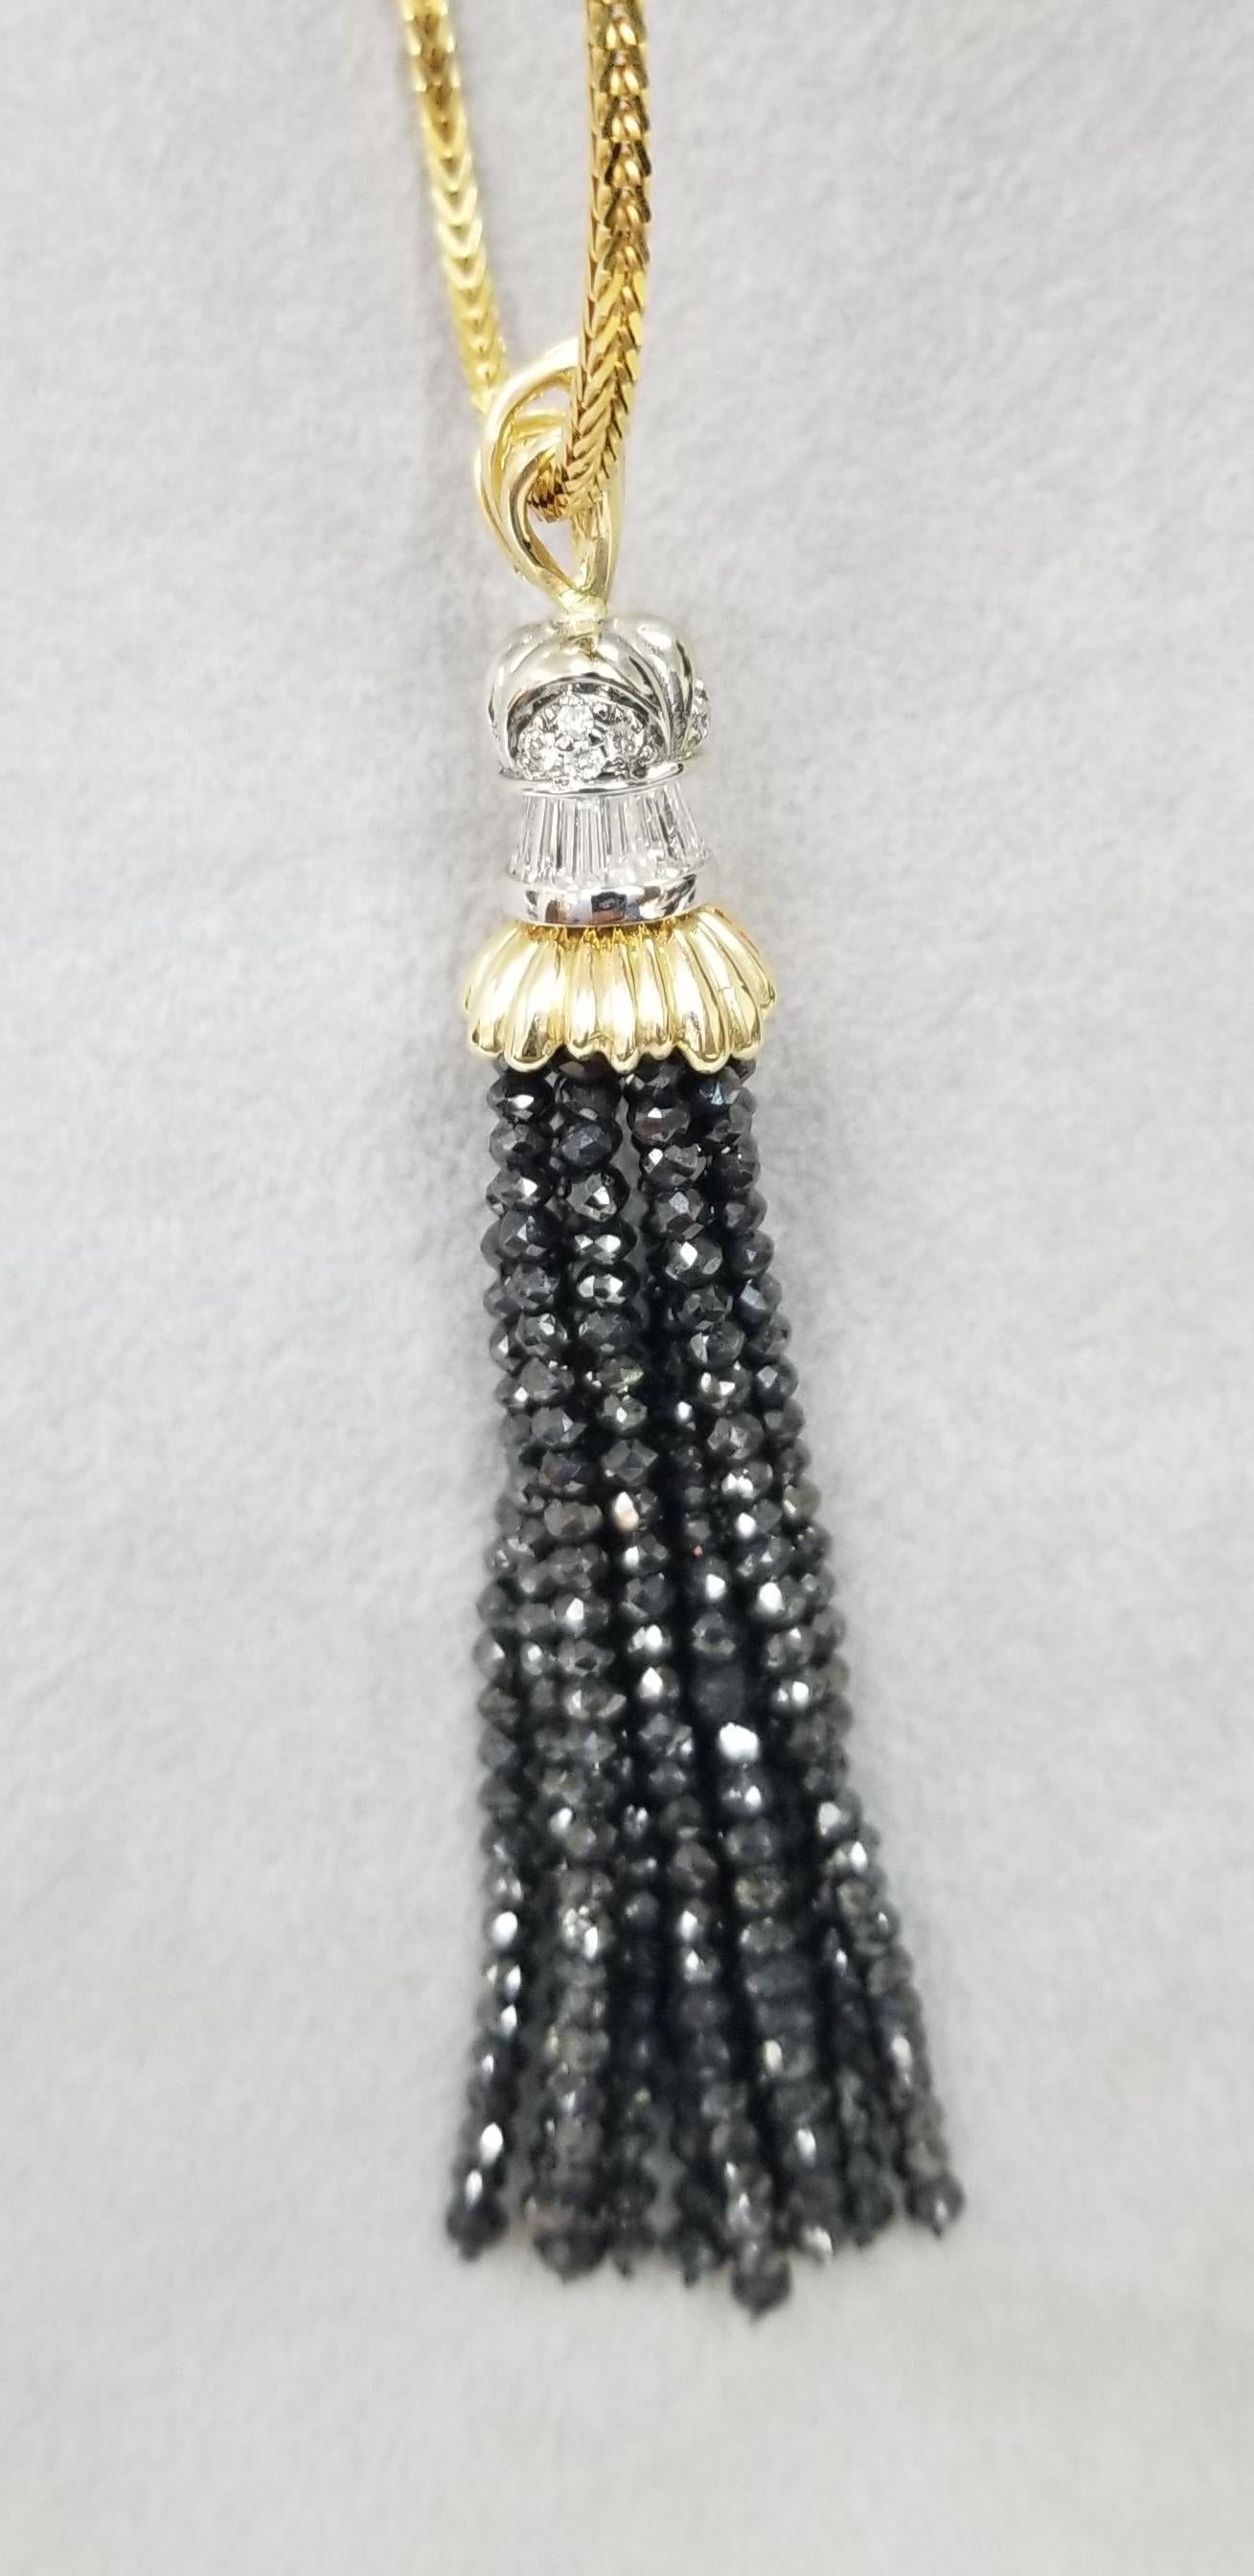 14k yellow gold diamond pendant containing 12 baguette cut diamonds weighing 1.10cts. and 15 round diamonds weighing .25pts. set in a 14k white gold setting with 10 strands of  black faceted diamond weighing 35.25xcts. hanging as tassels.  on a 24